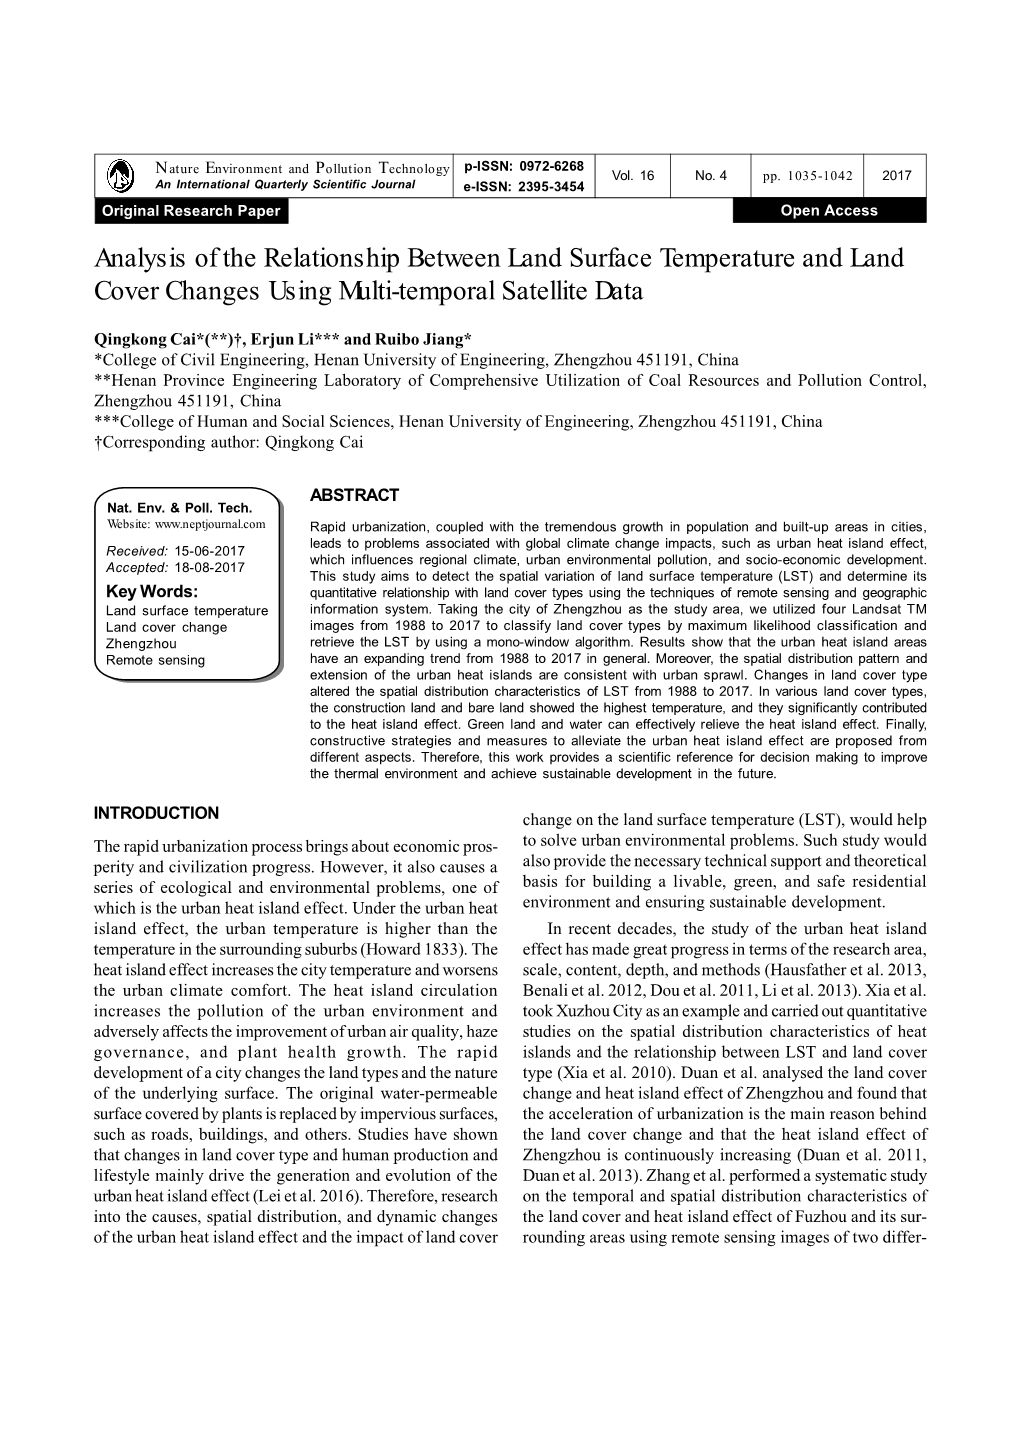 Analysis of the Relationship Between Land Surface Temperature and Land Cover Changes Using Multi-Temporal Satellite Data